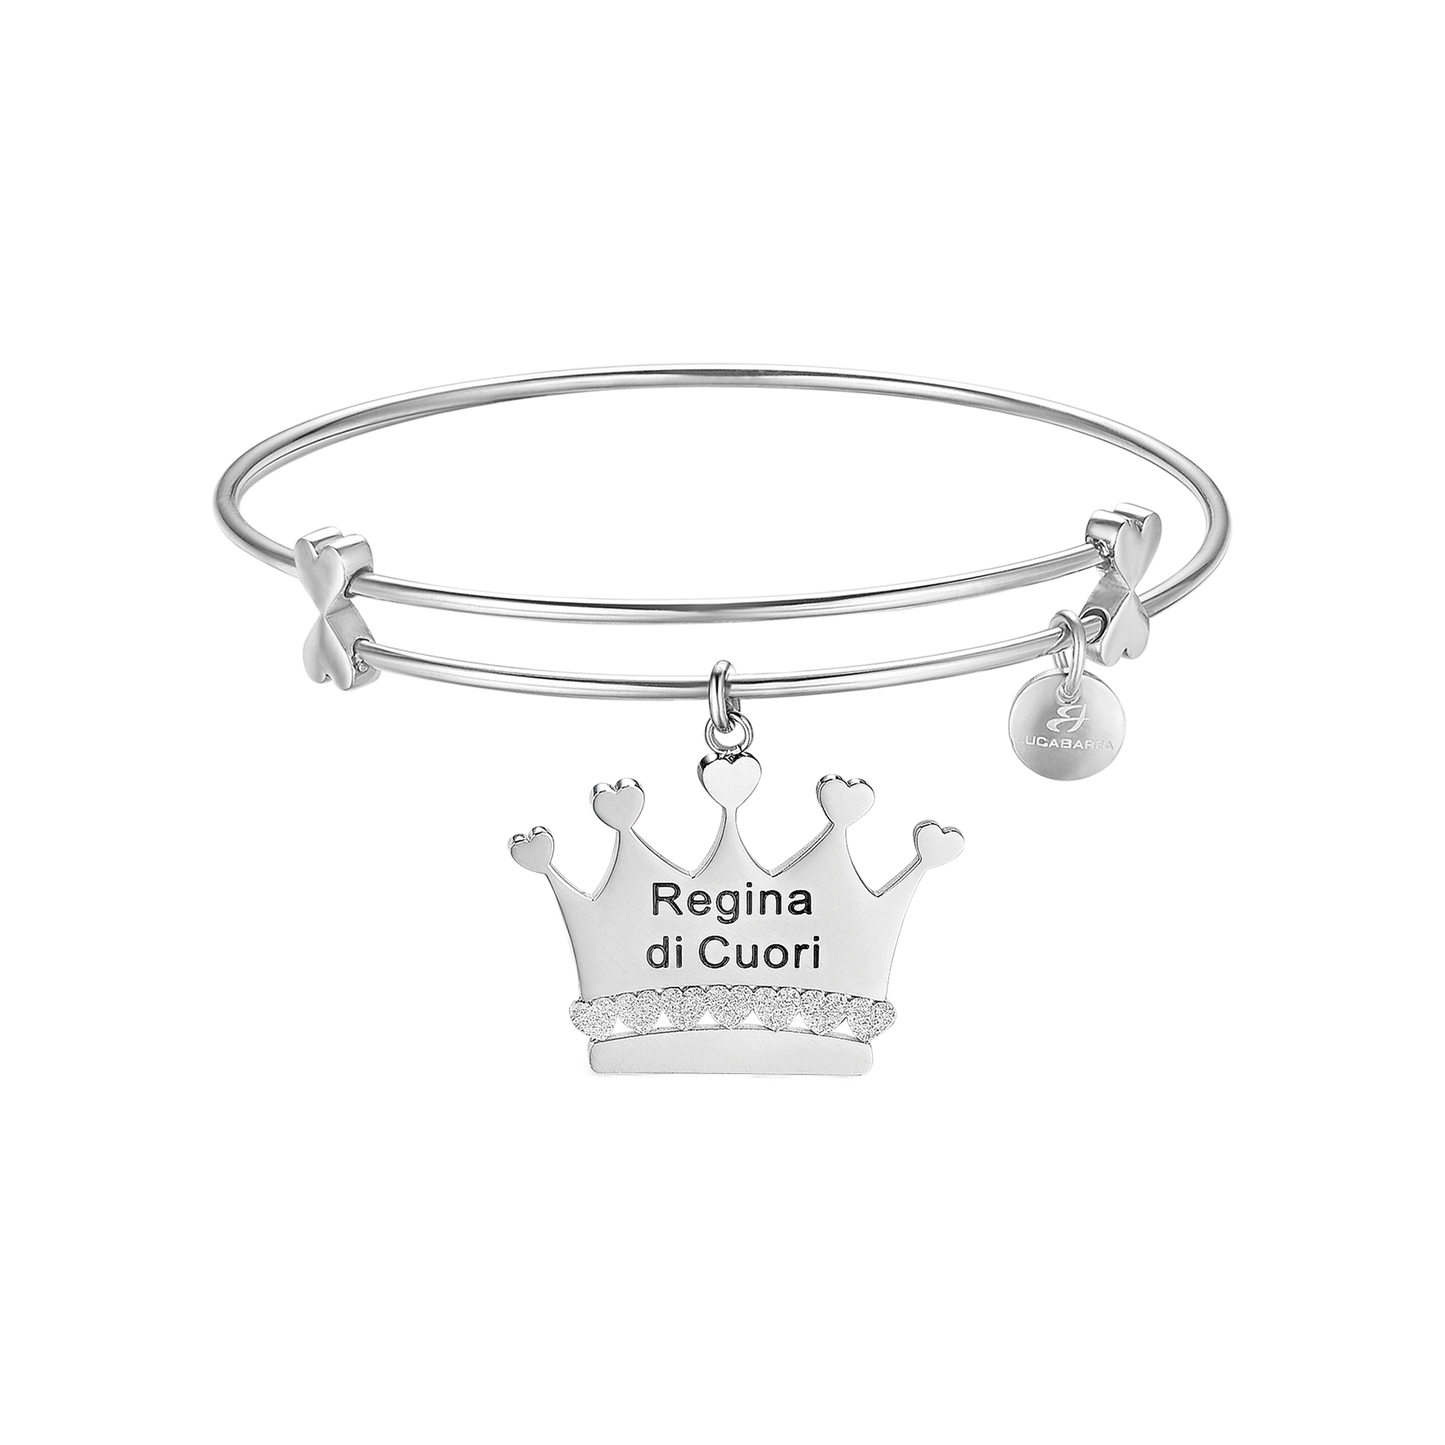 STEEL BRACELET WITH CROWN AND WRITING "QUEEN OF HEARTS" Luca Barra